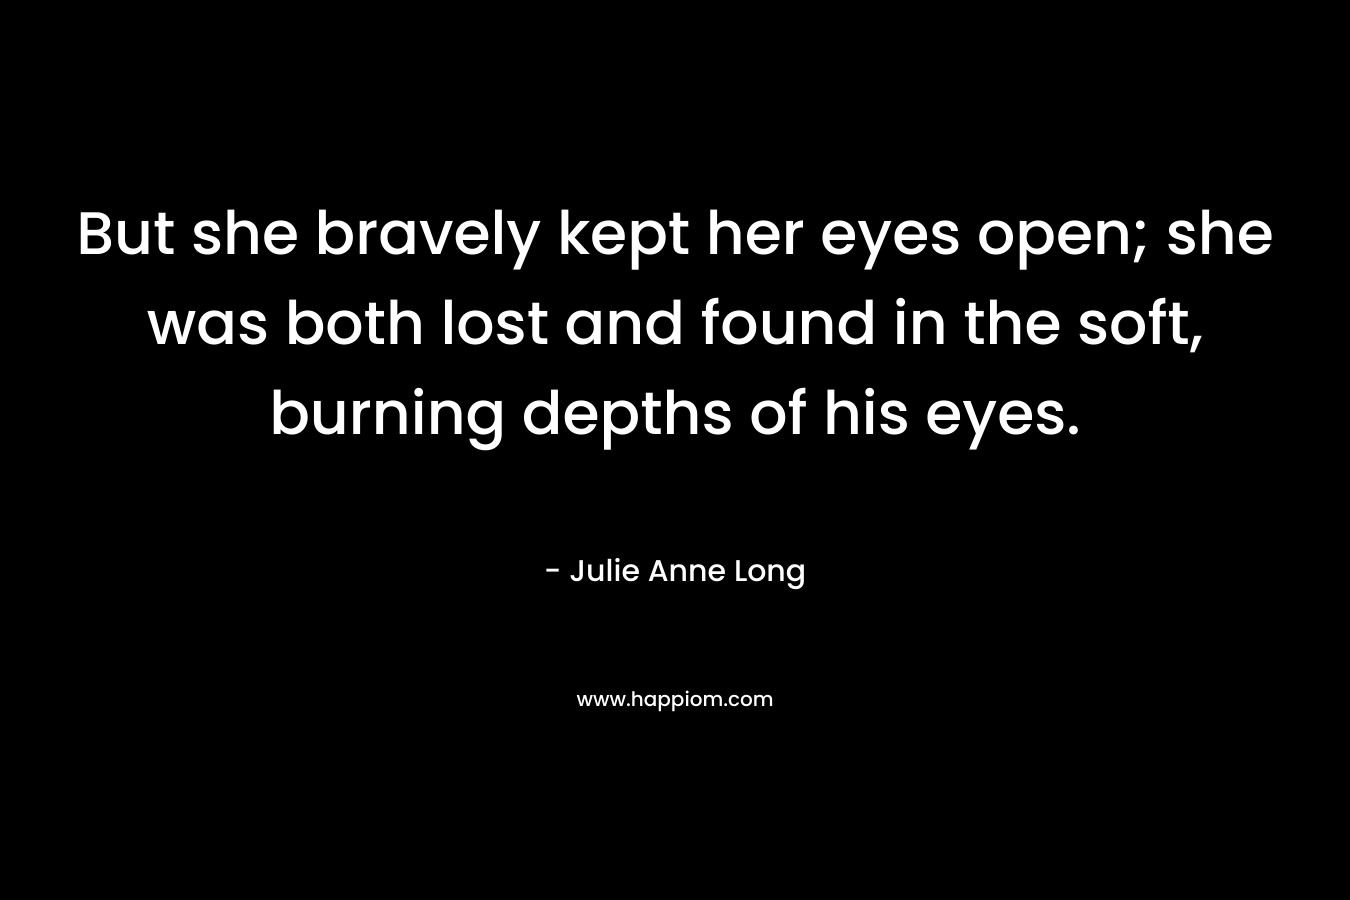 But she bravely kept her eyes open; she was both lost and found in the soft, burning depths of his eyes.